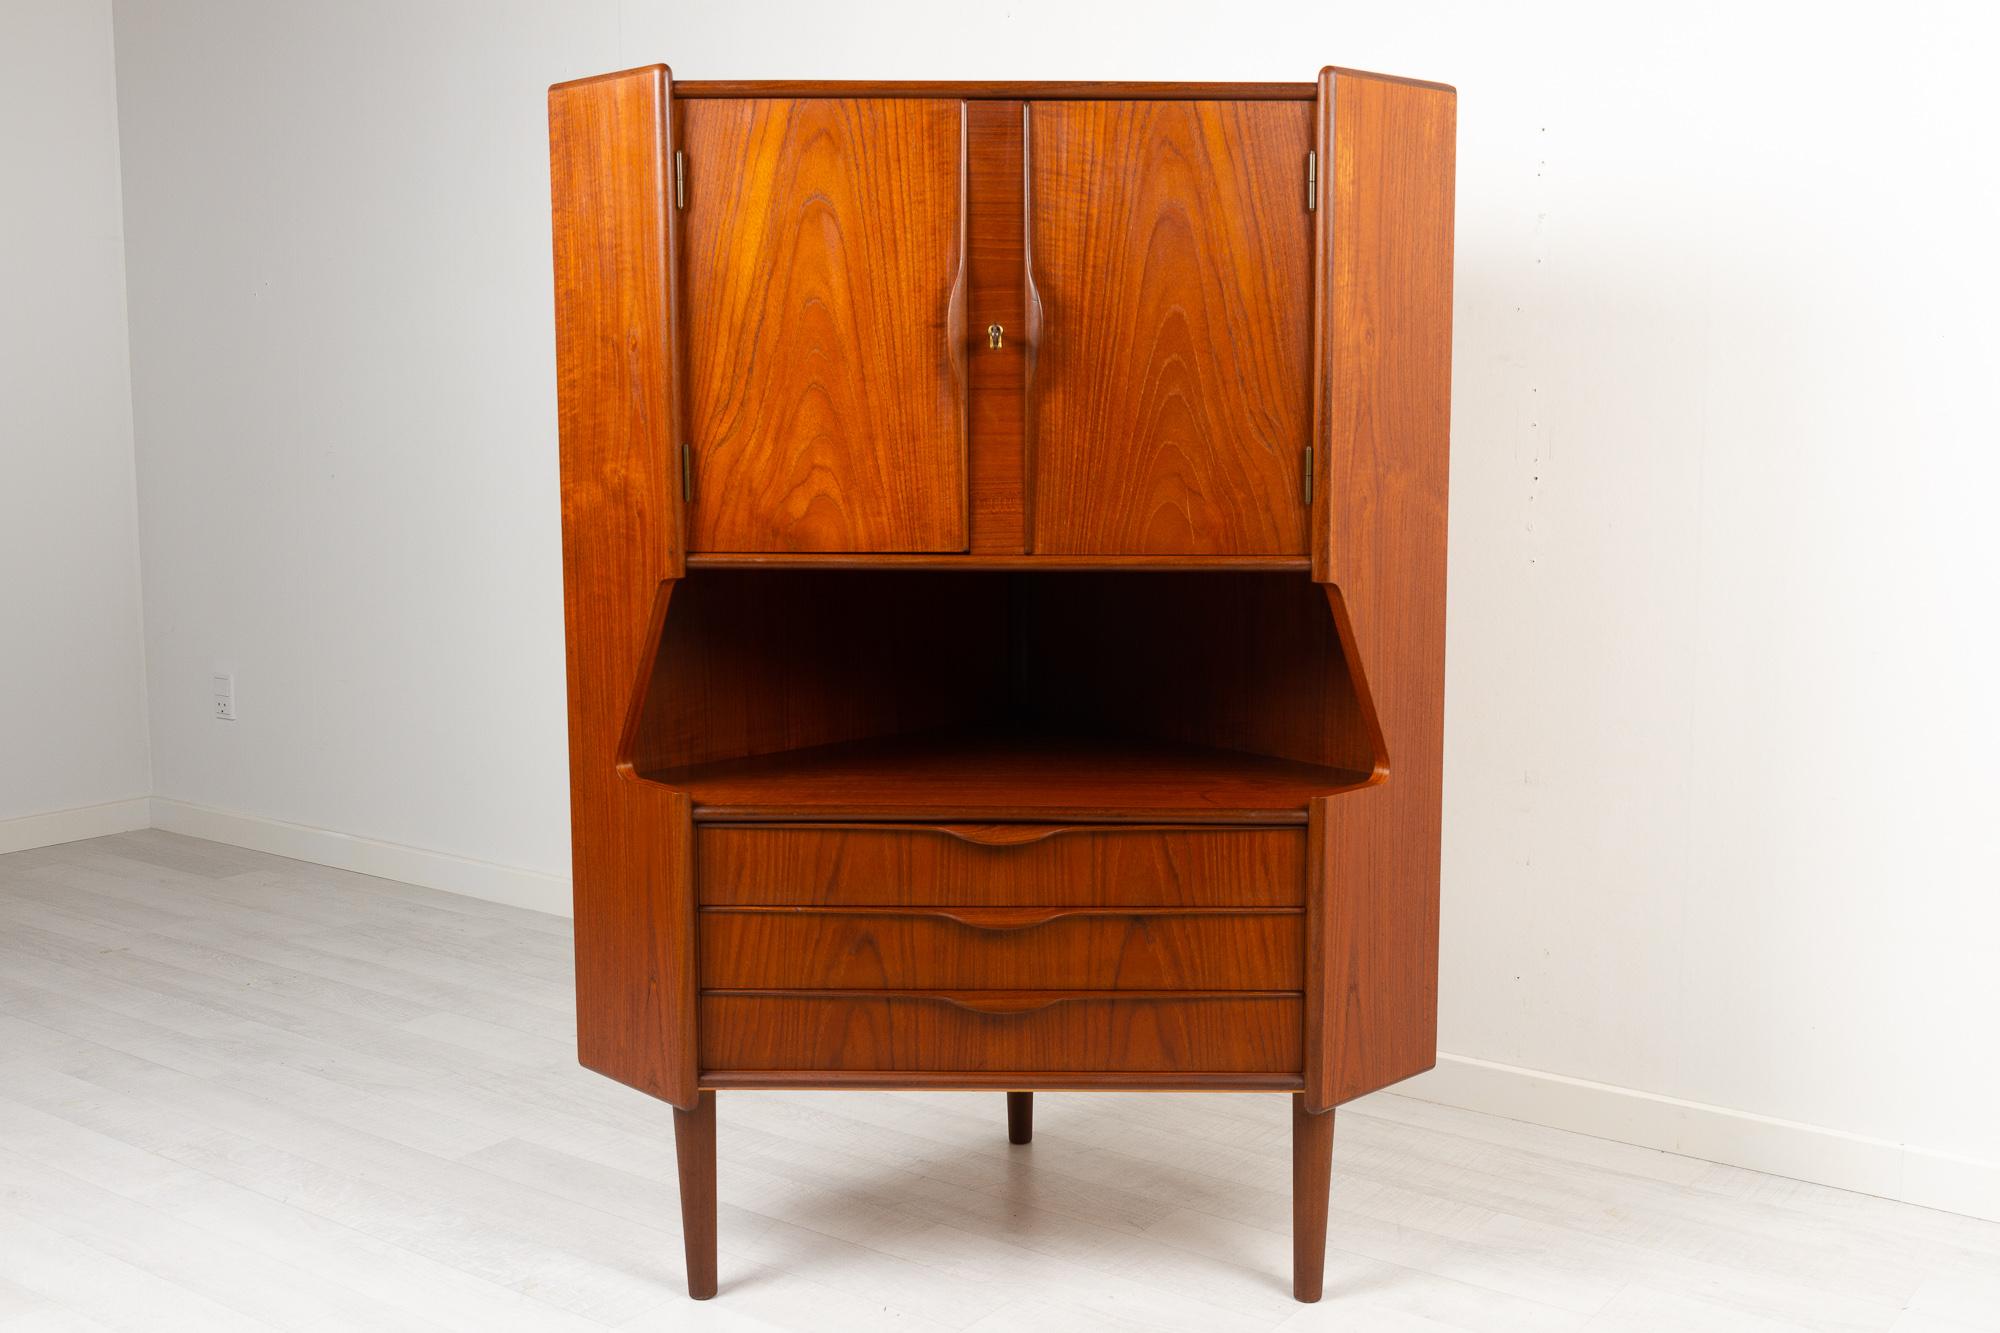 Vintage Danish teak corner cabinet with dry bar, 1960s
Danish Mid-Century Modern corner cabinet with bar unit and drawers. Cabinet behind double doors with lock and key. Inside decorated mirror and curved shelf. Amble space for glasses and bottles.